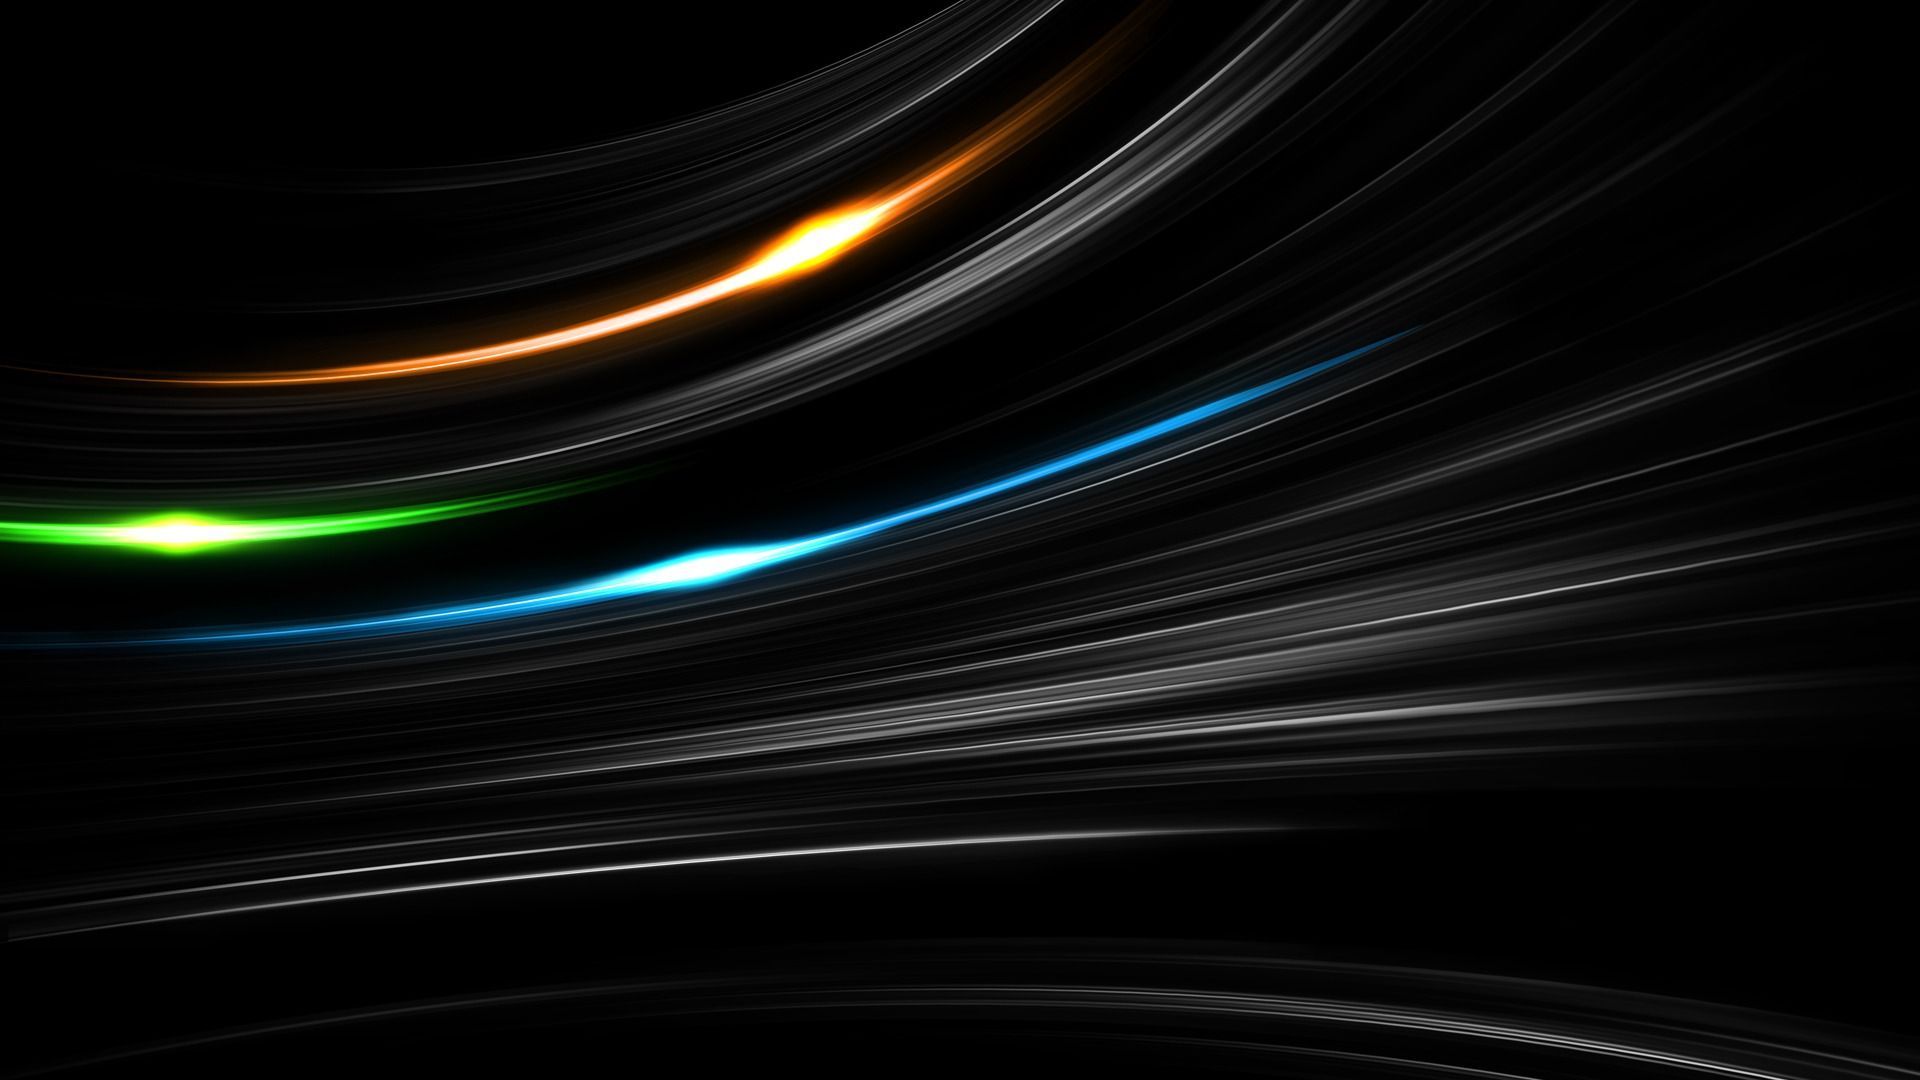 3D Wallpapers | Abstract Desktop Backgrounds | HD Wallpapers - Page 7